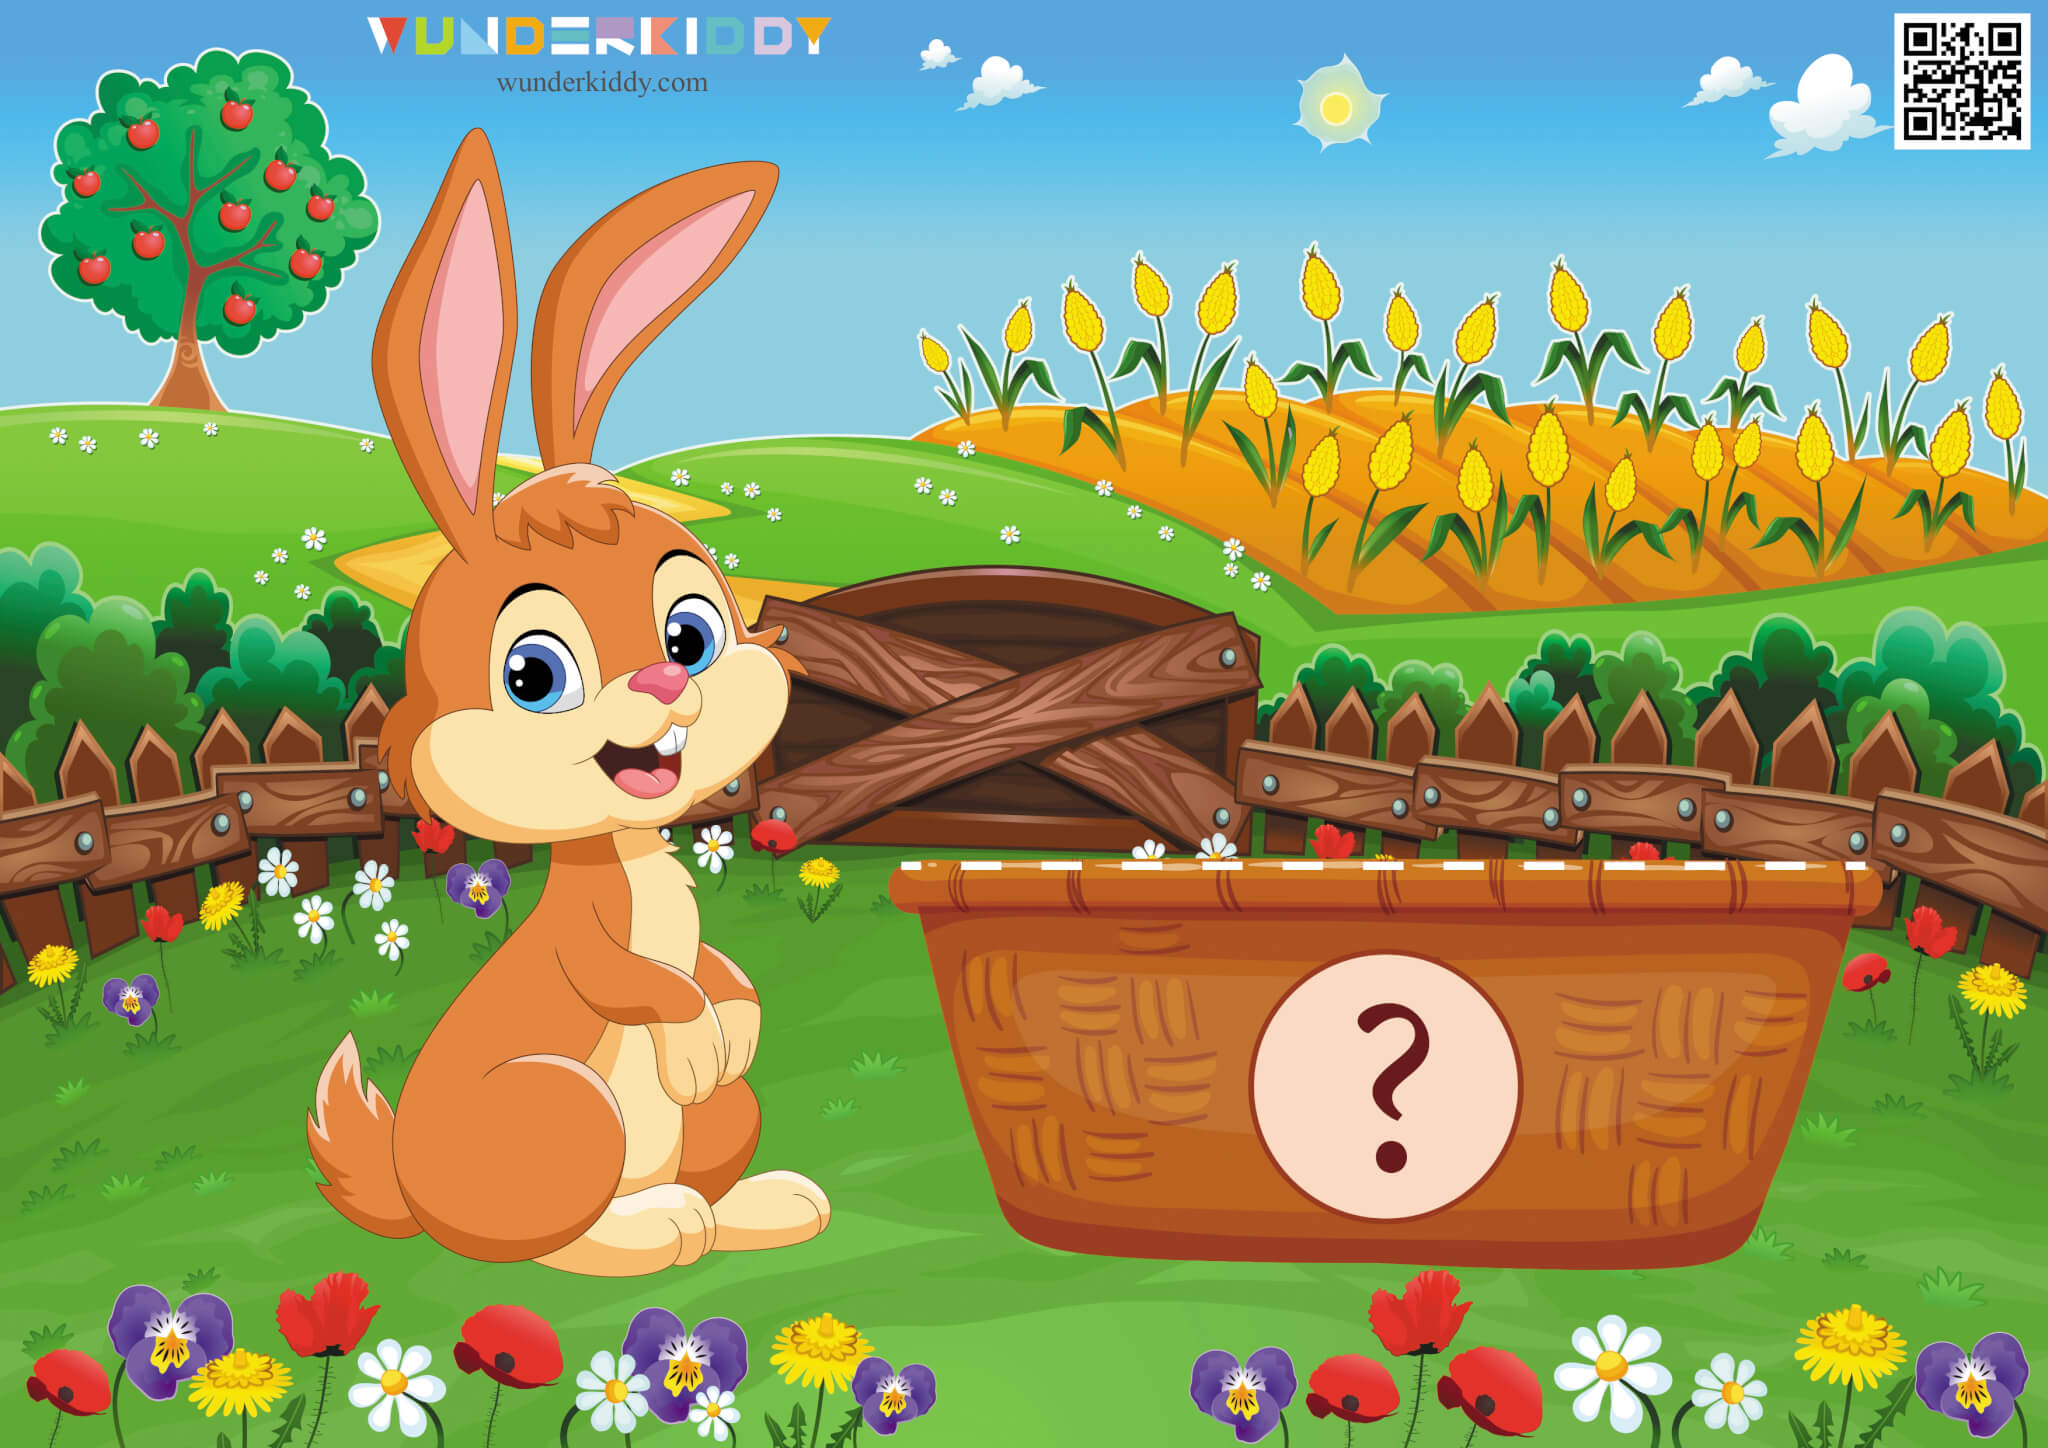 Activity sheet «Bunny and carrot» - Image 2